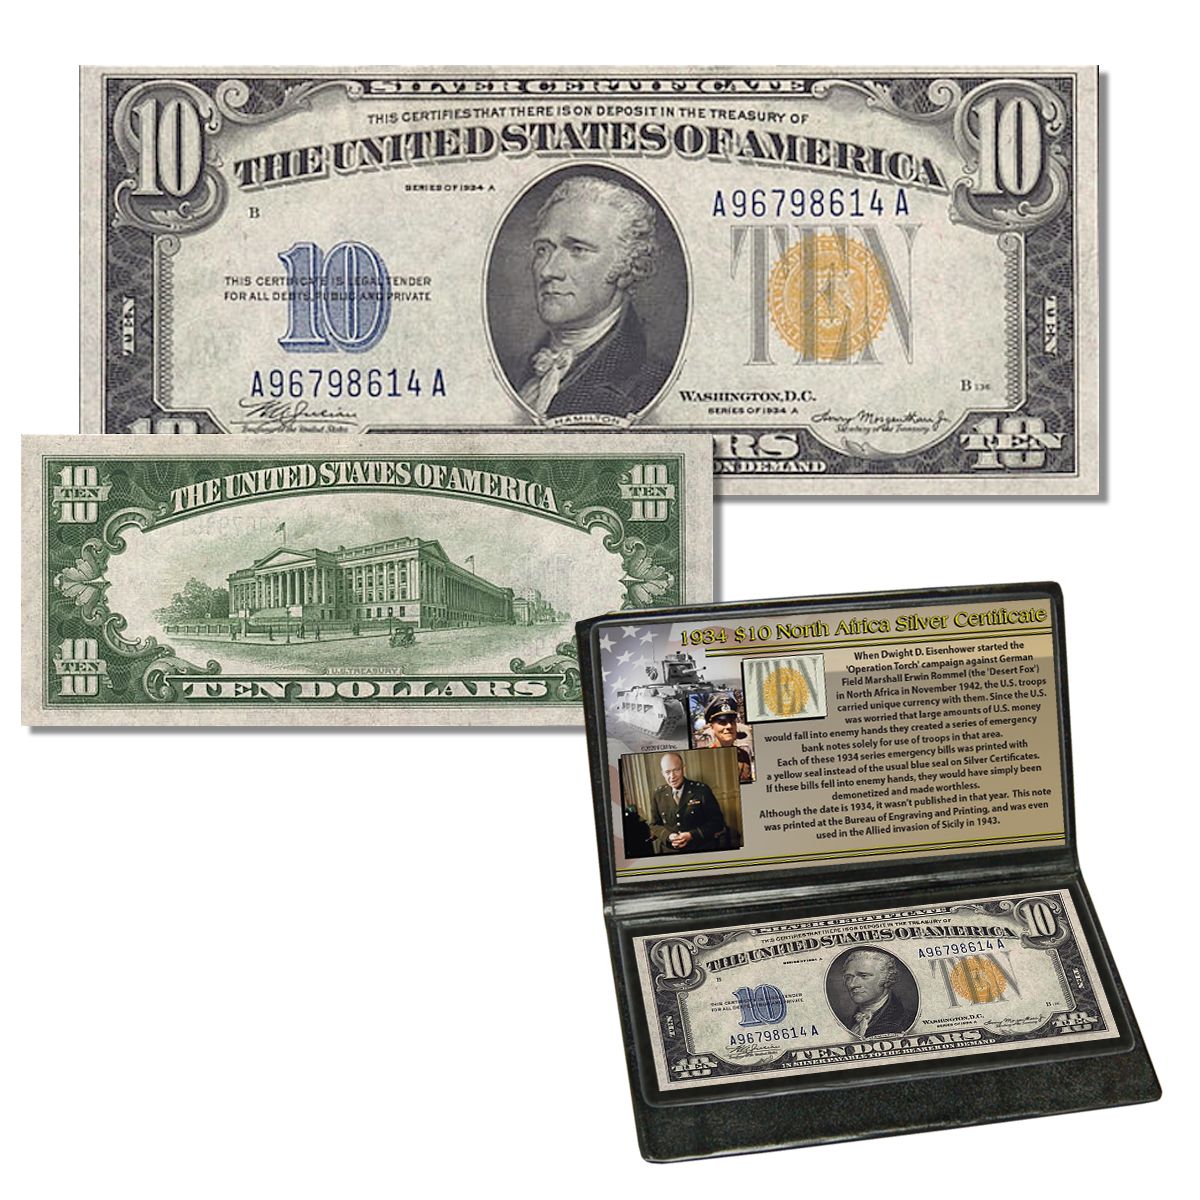 Details about   FR-2307 1934 A Series North Africa WWII $5 Silver Certificate *PMG 58 EPQ CH AU* 